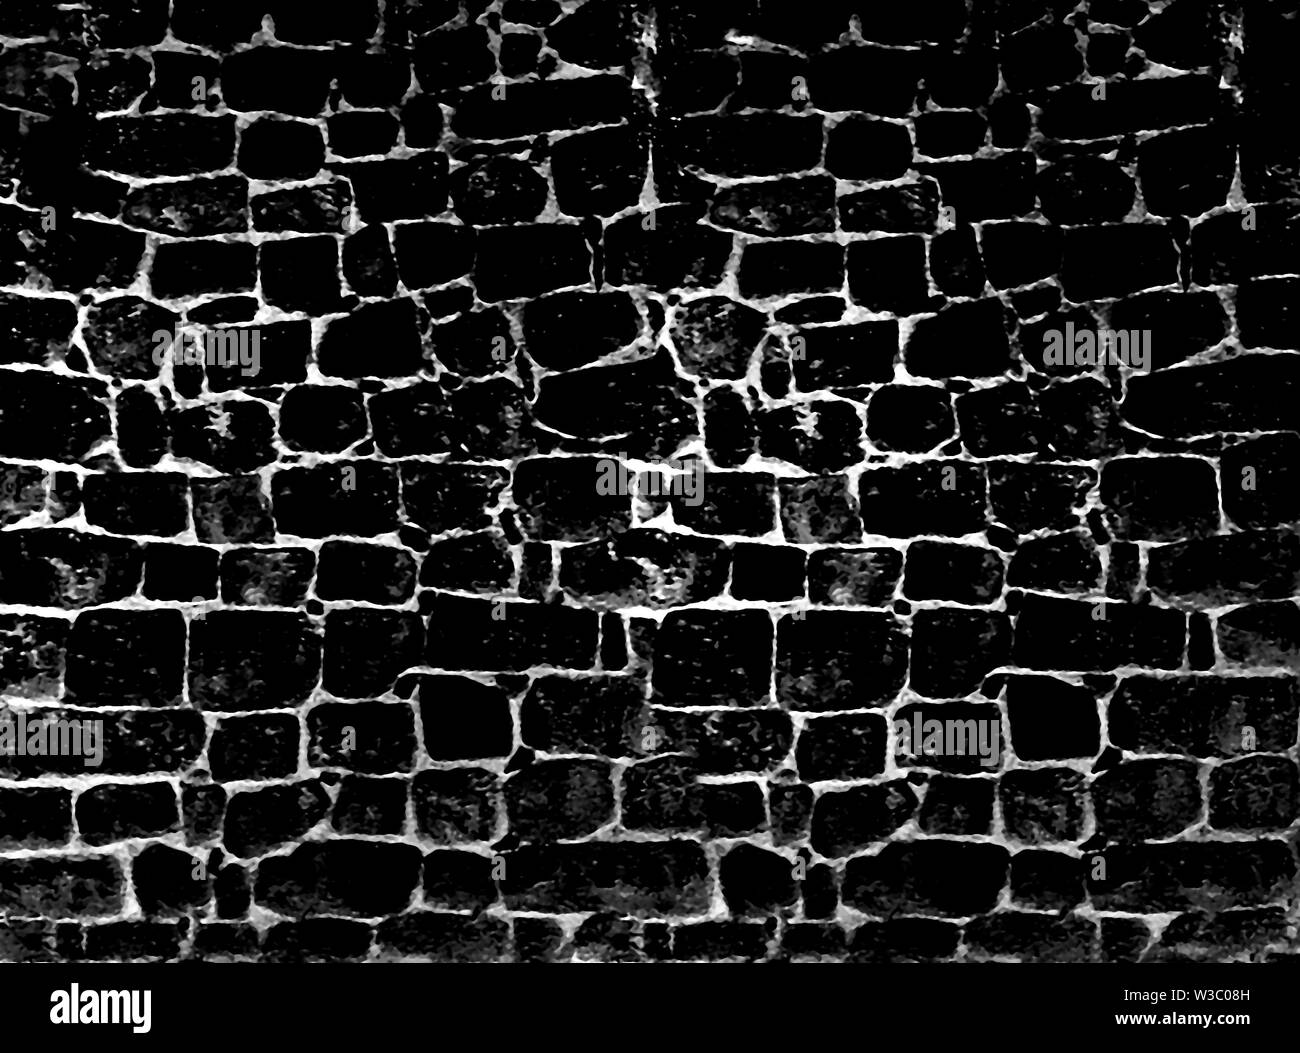 Black and white graphic stone patterned wall background Stock Photo